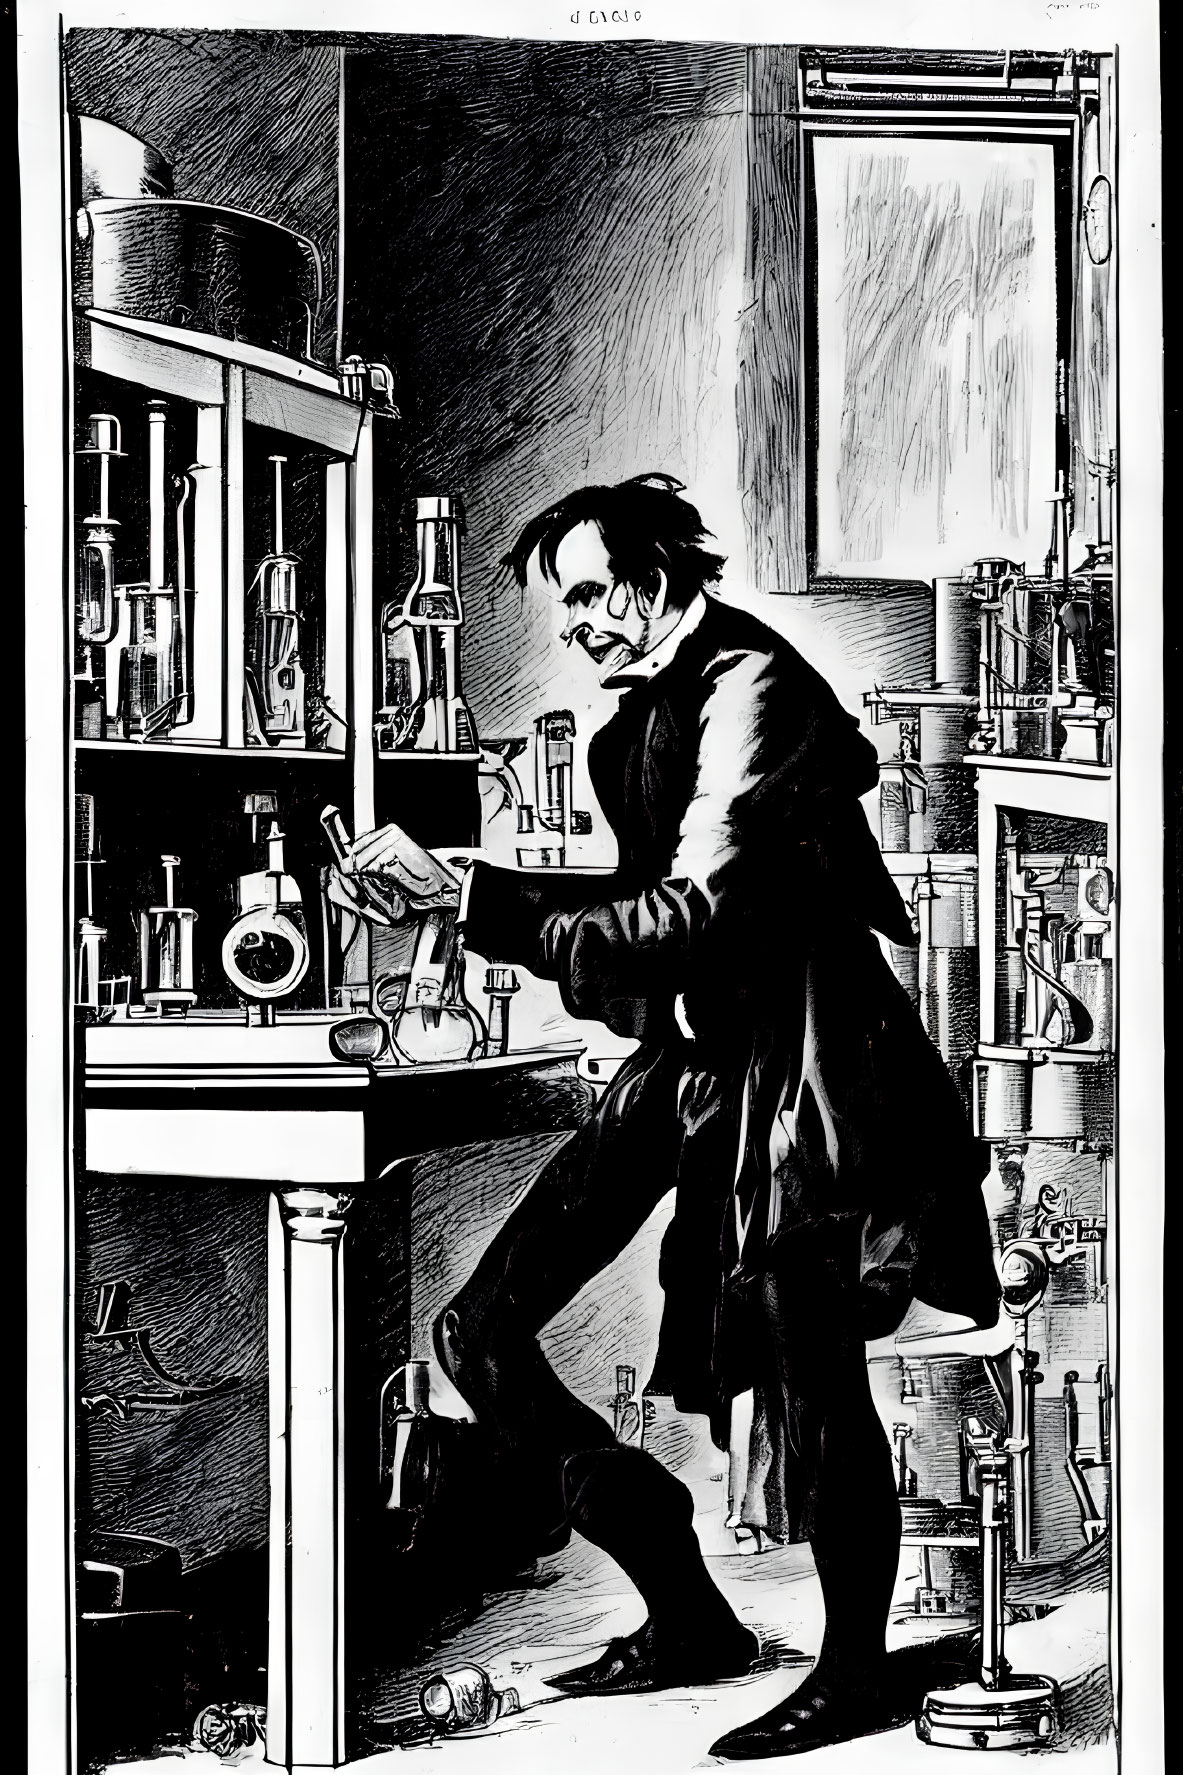 Monochromatic illustration of man in lab coat working in cluttered laboratory